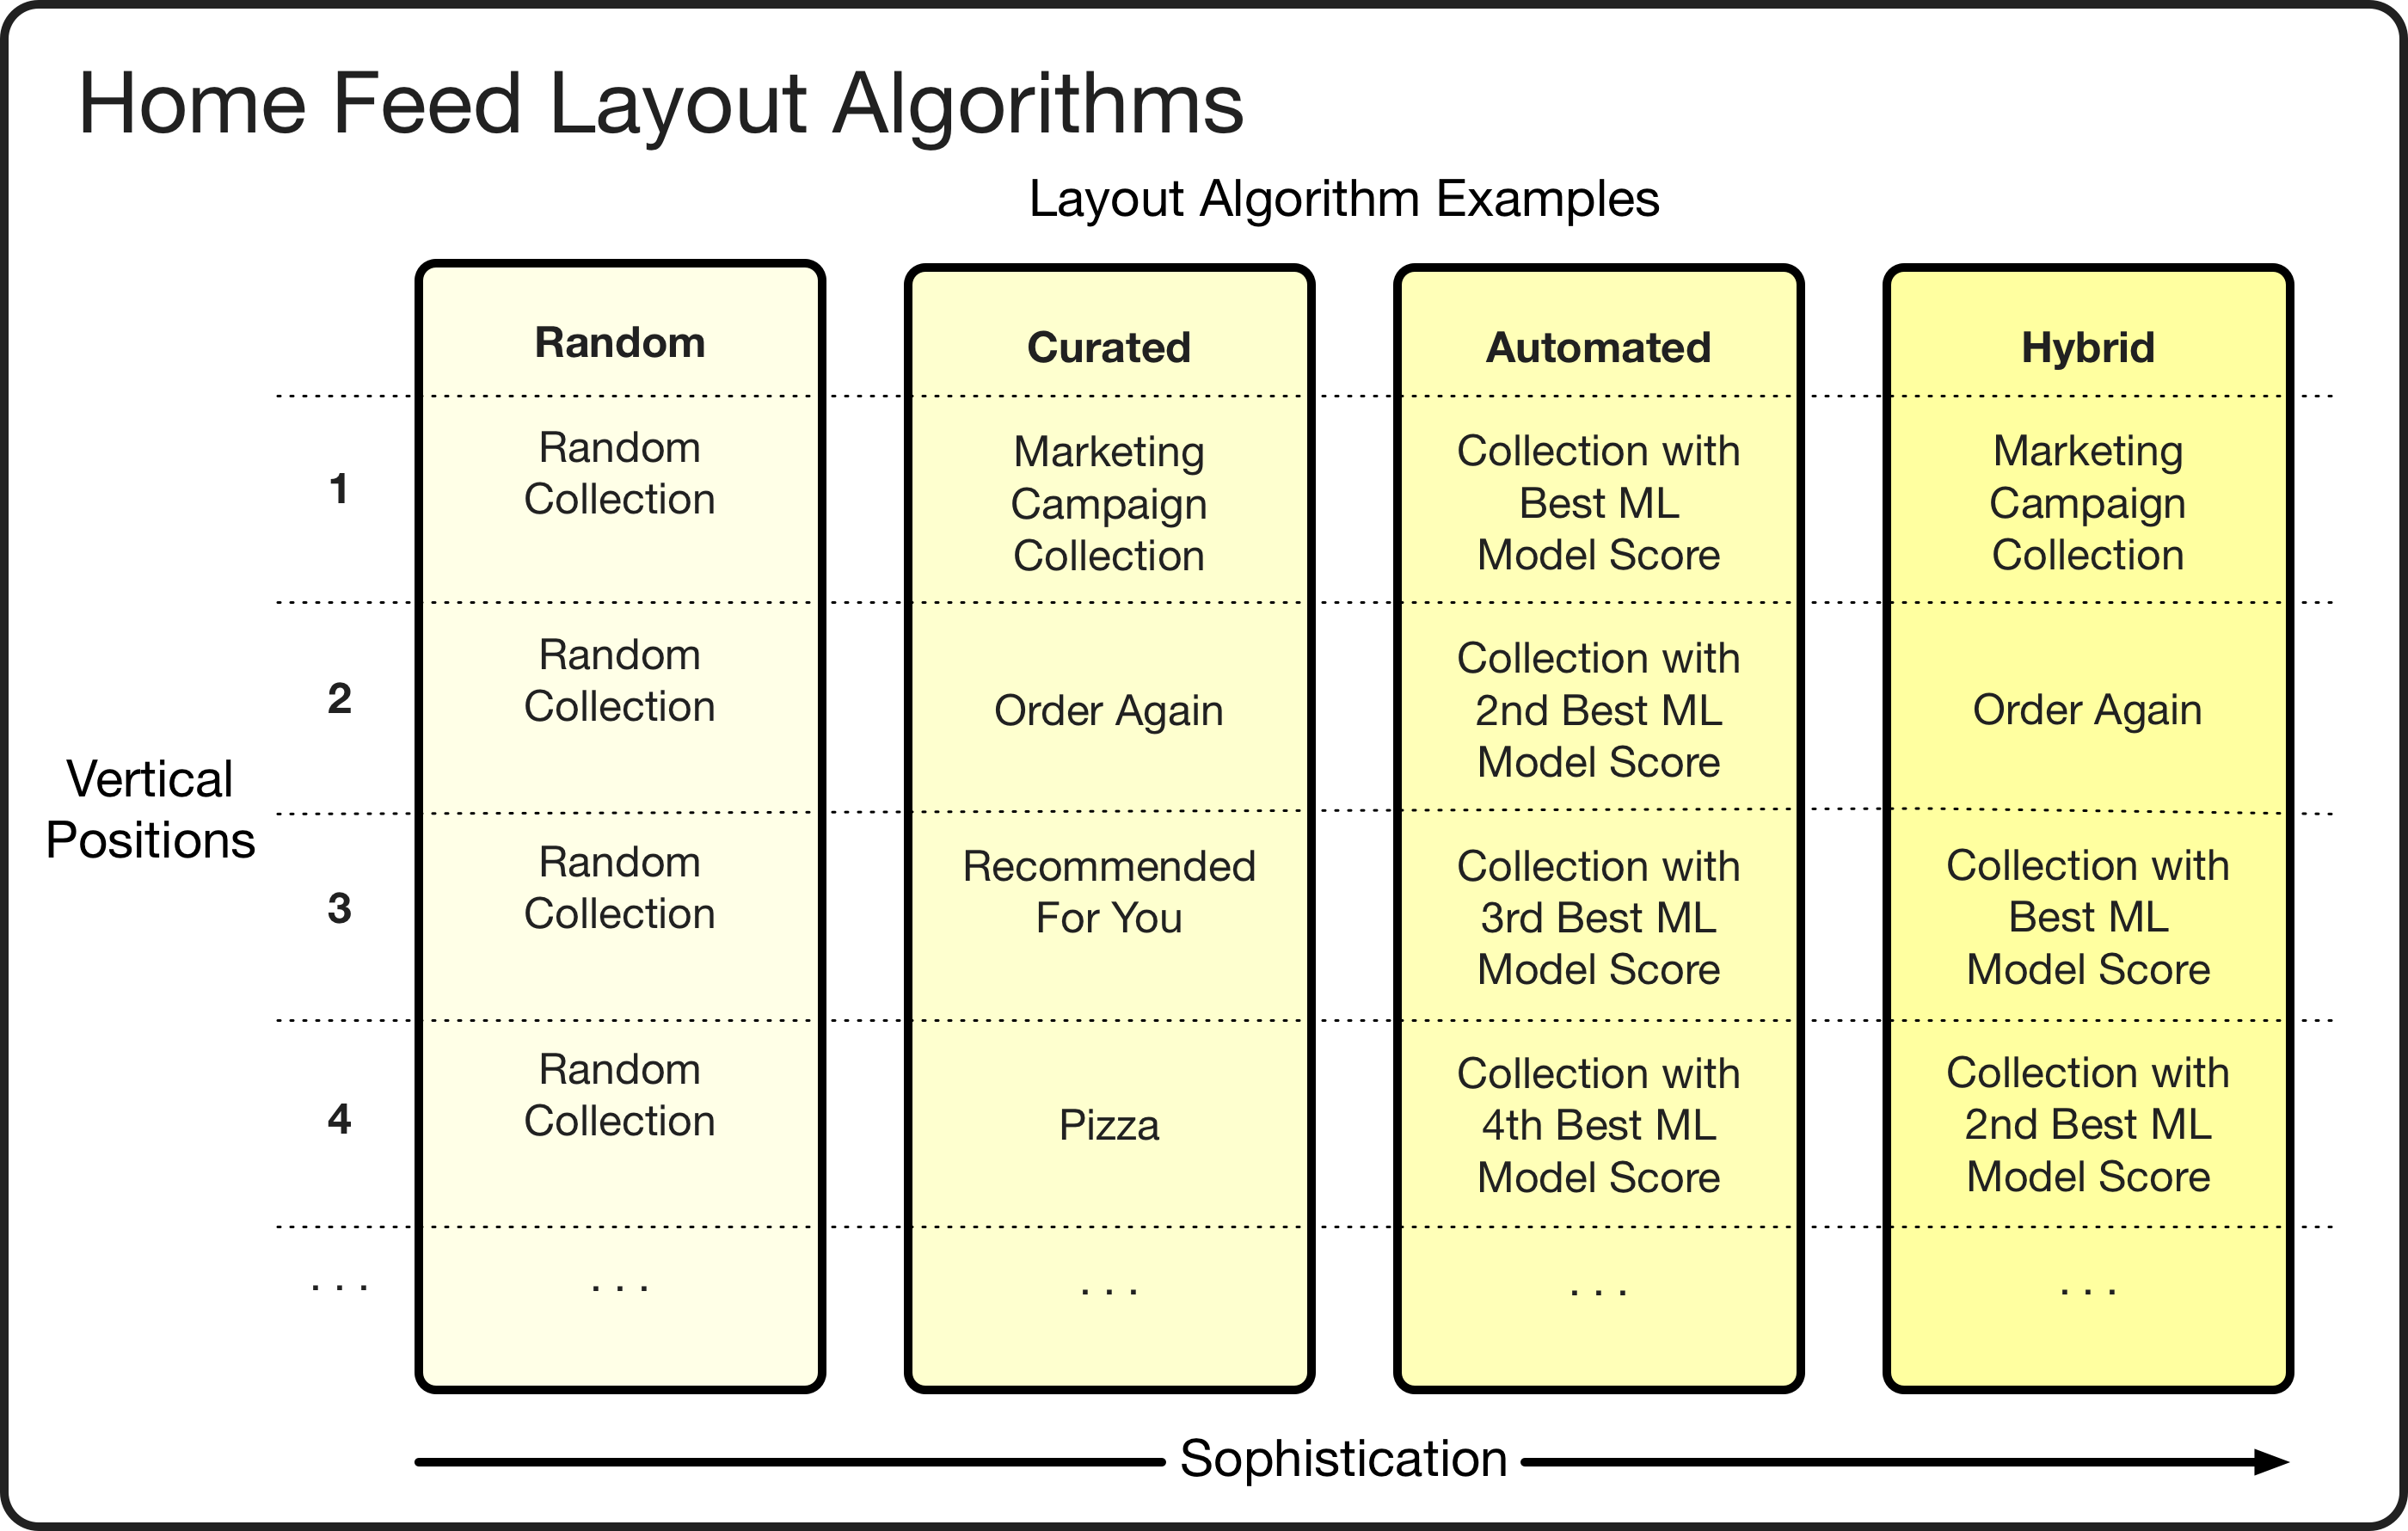 Home feed layout algorithm examples.